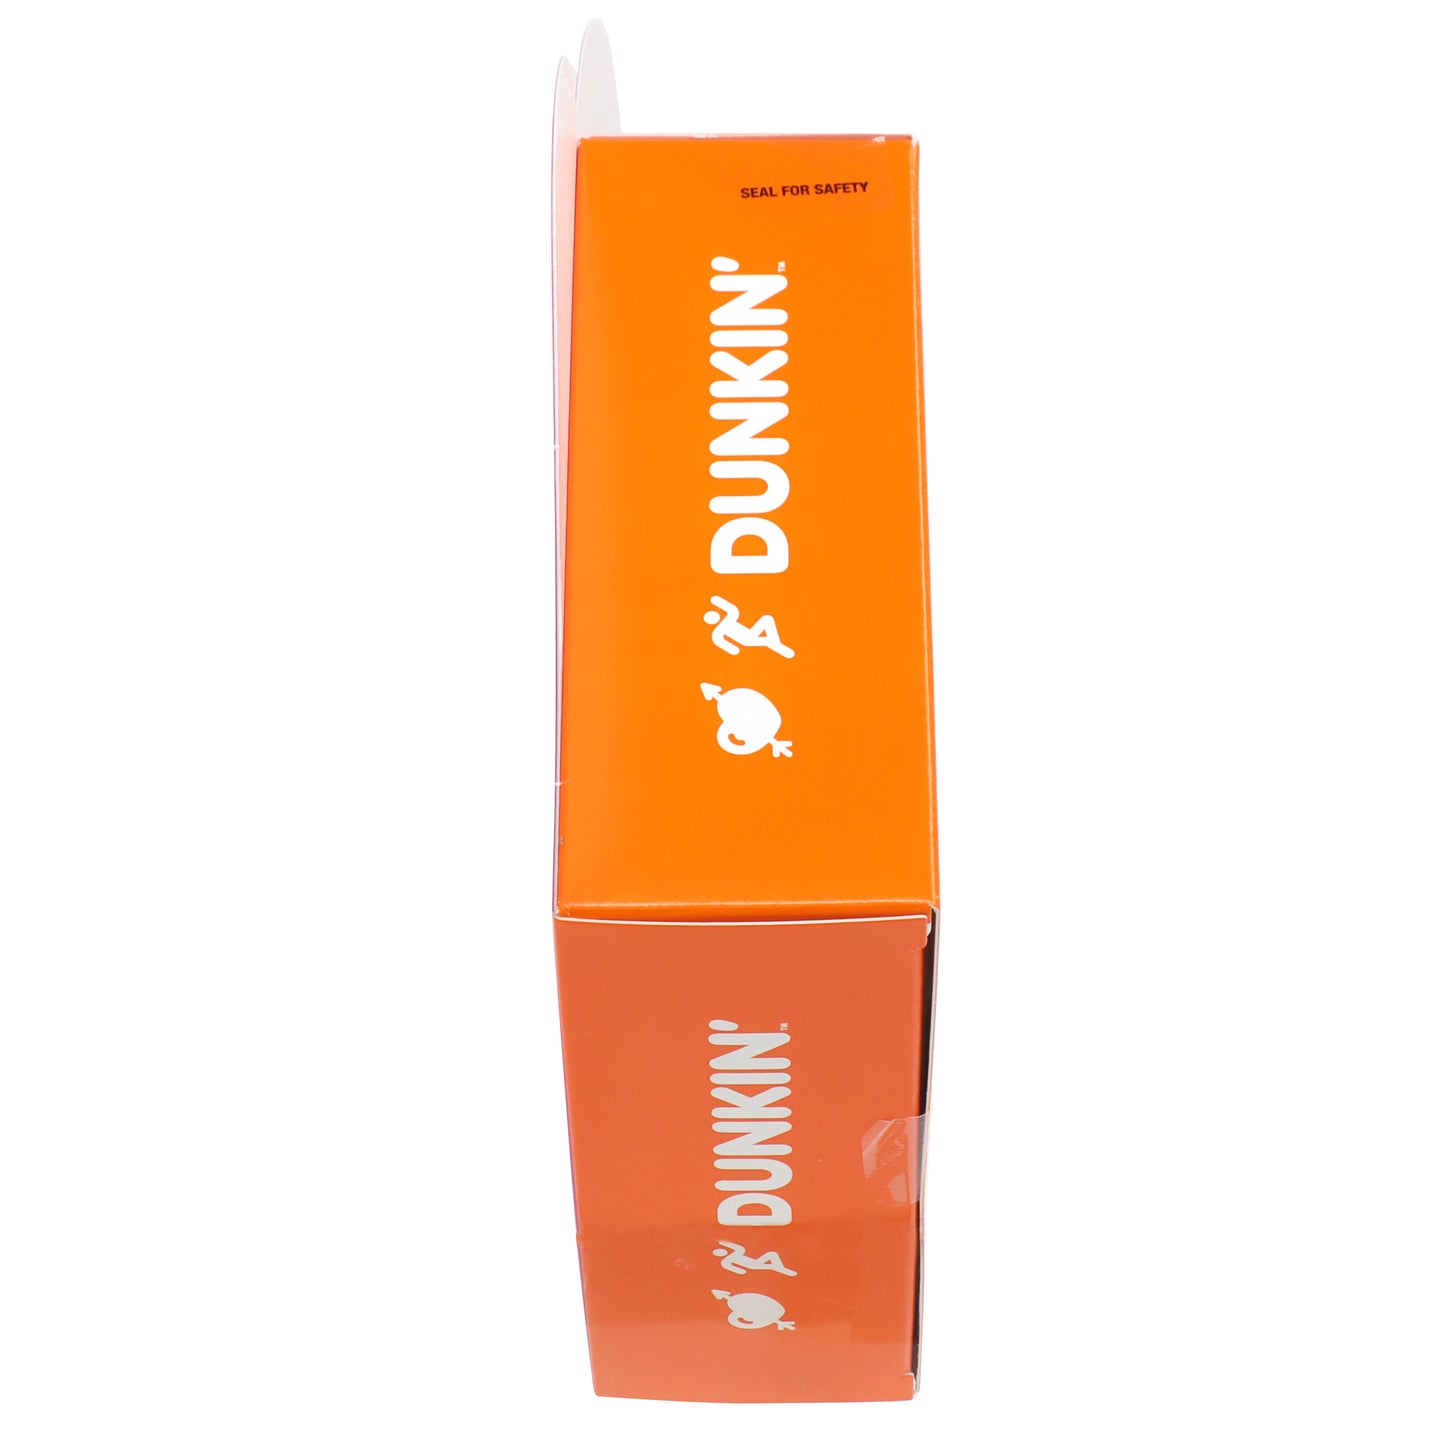 side view of an orange box with dunkin written on the sides